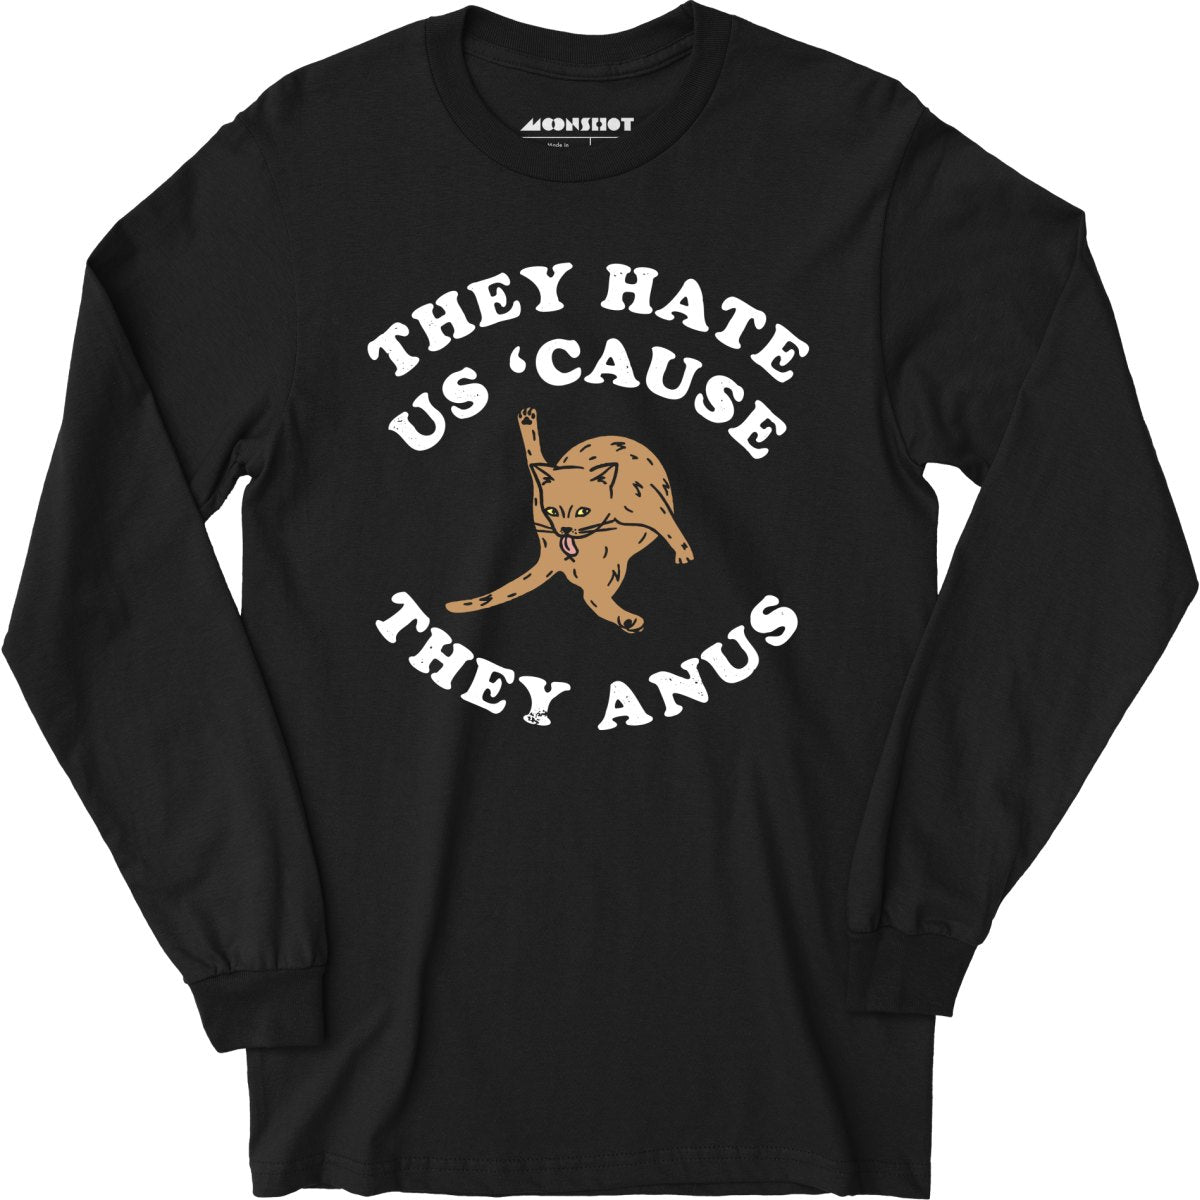 They Hate Us Cause They Anus - Long Sleeve T-Shirt